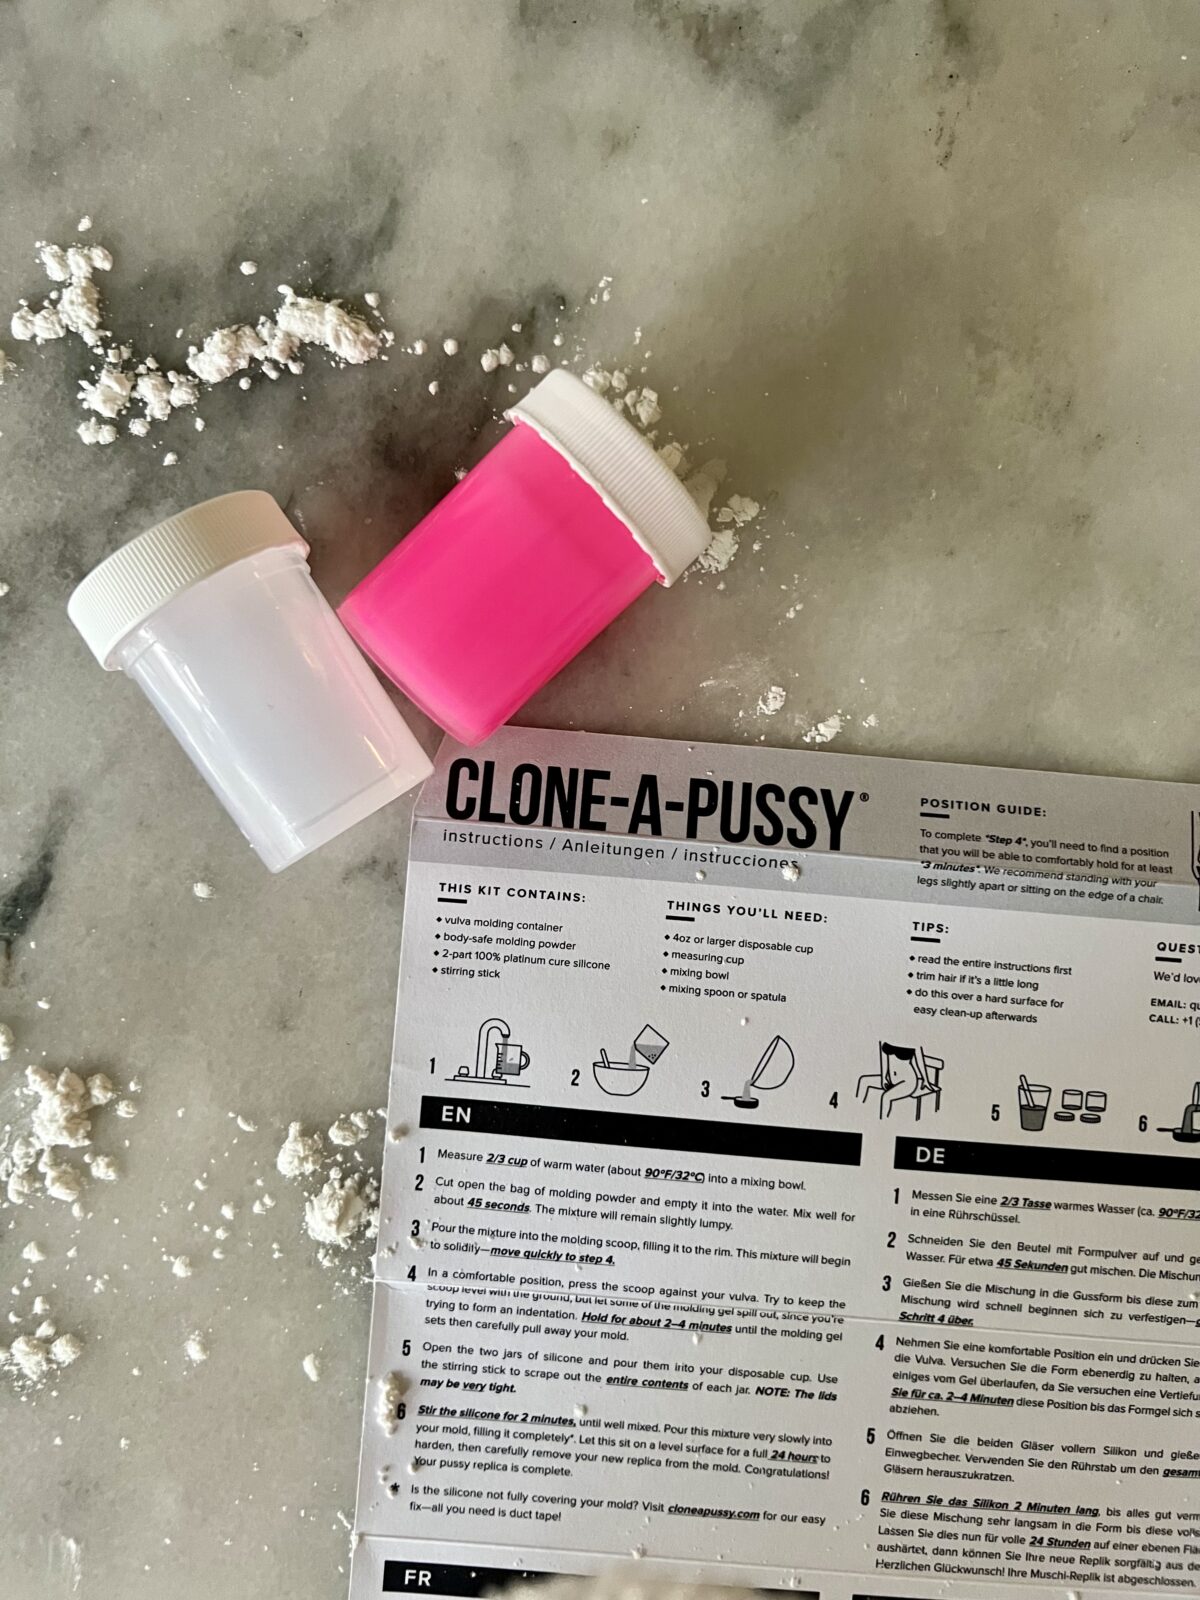 hot pink silicone for the Clone a Pussy vulva cloning kit